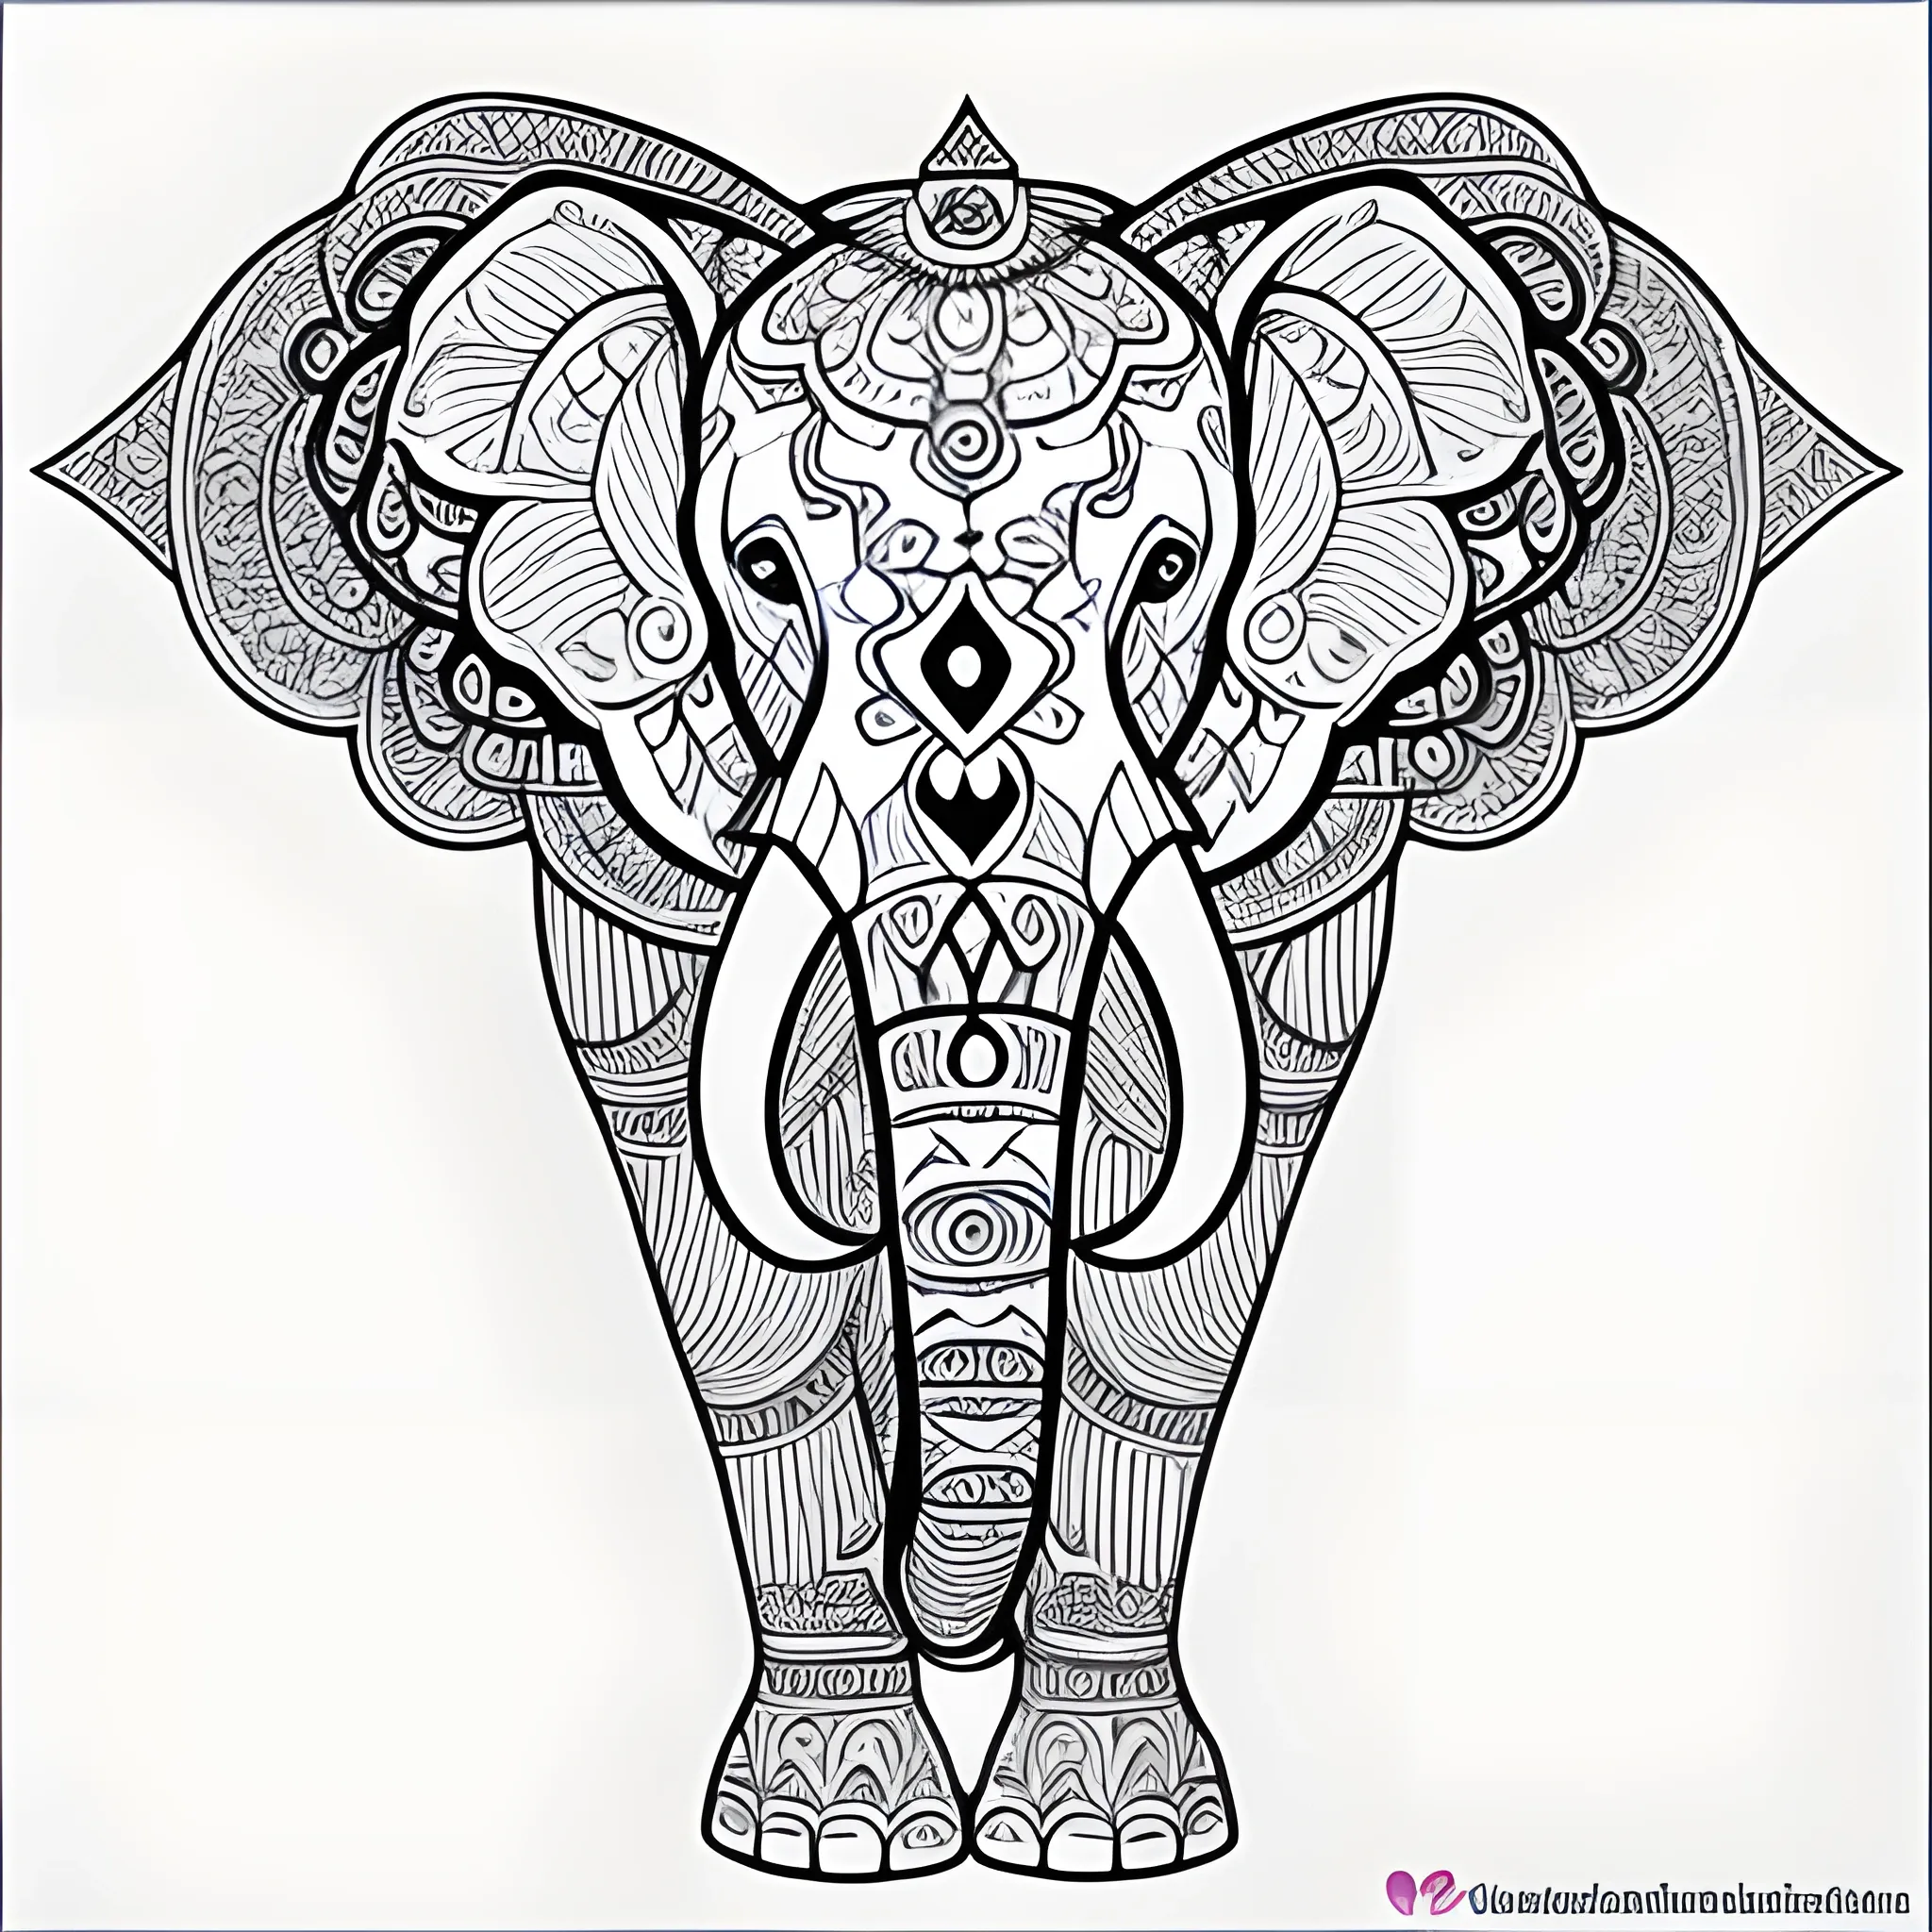 Coloring book page of a mandala elephant inspired in the indian